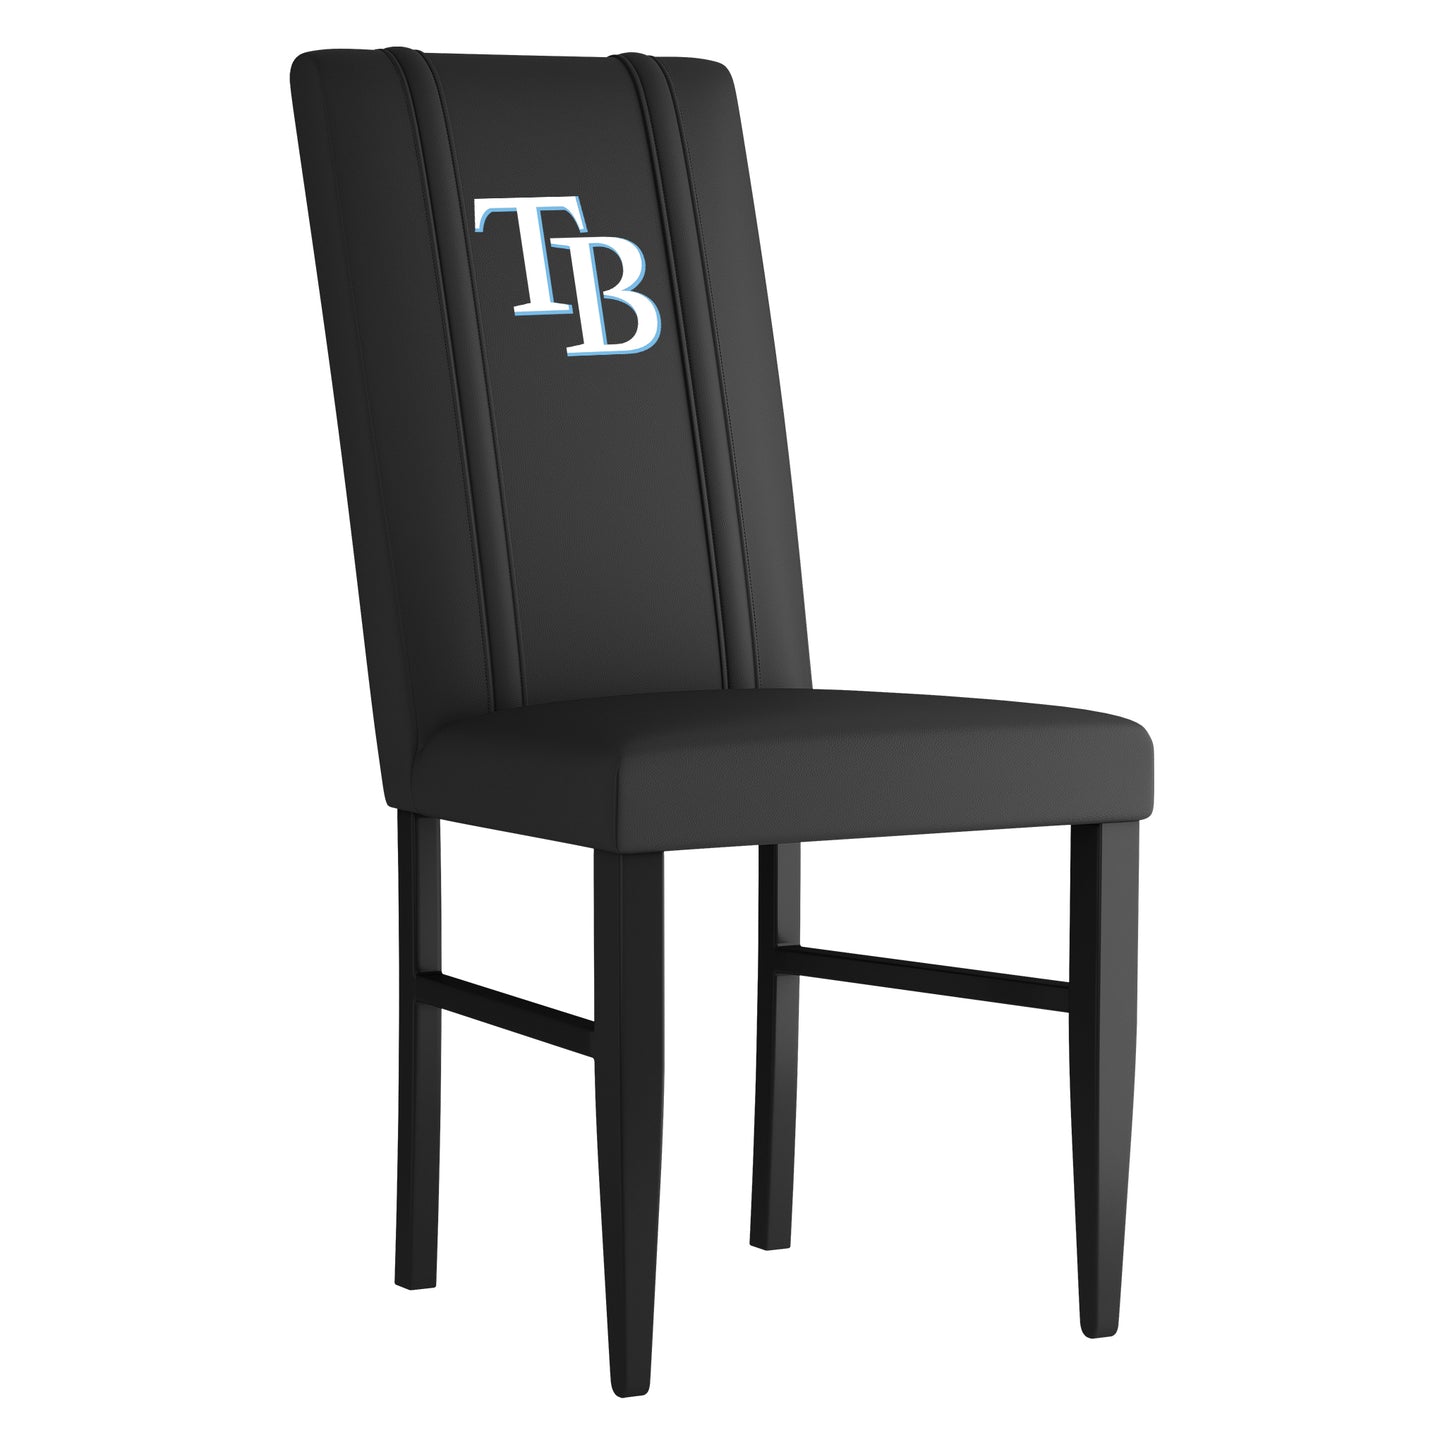 Side Chair 2000 with Tampa Bay Rays Secondary Set of 2